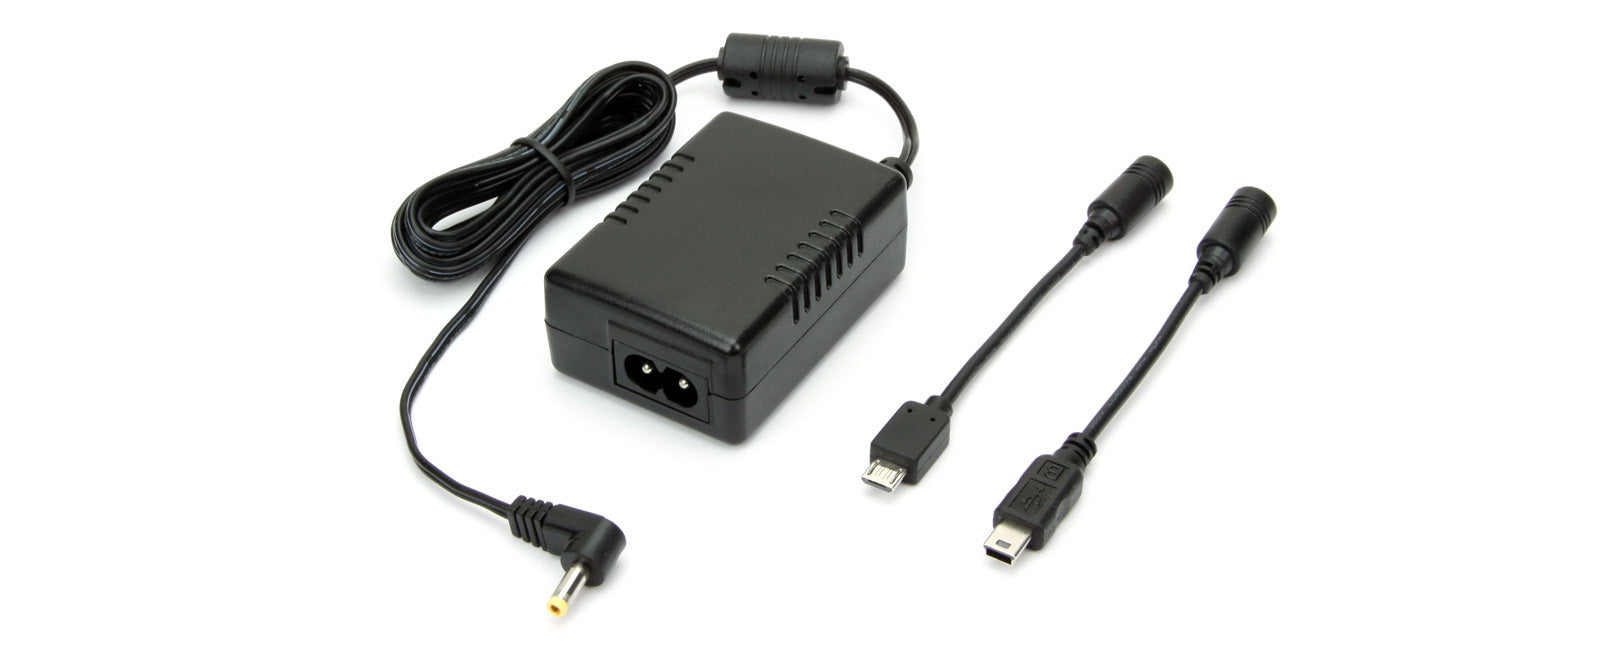 Tascam PS-P520E Power supply for Tascam Hand-Held Products